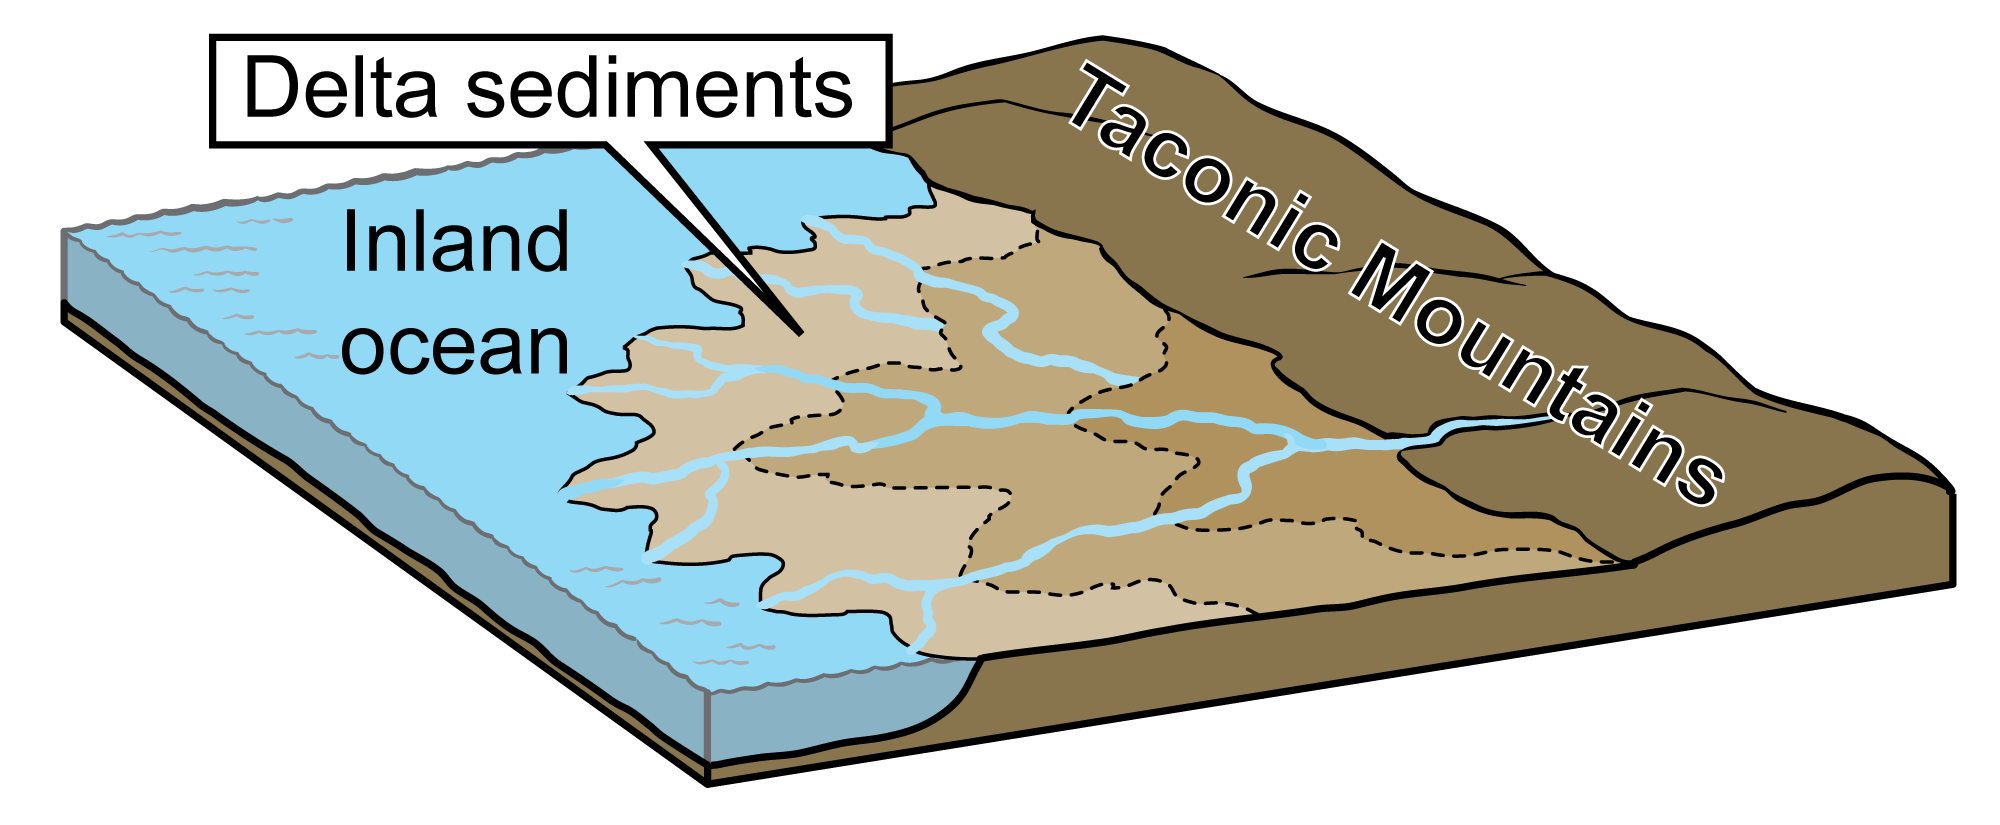 Drawing showing the formation of a delta in the inland ocean at the base of the Taconic Mountains.